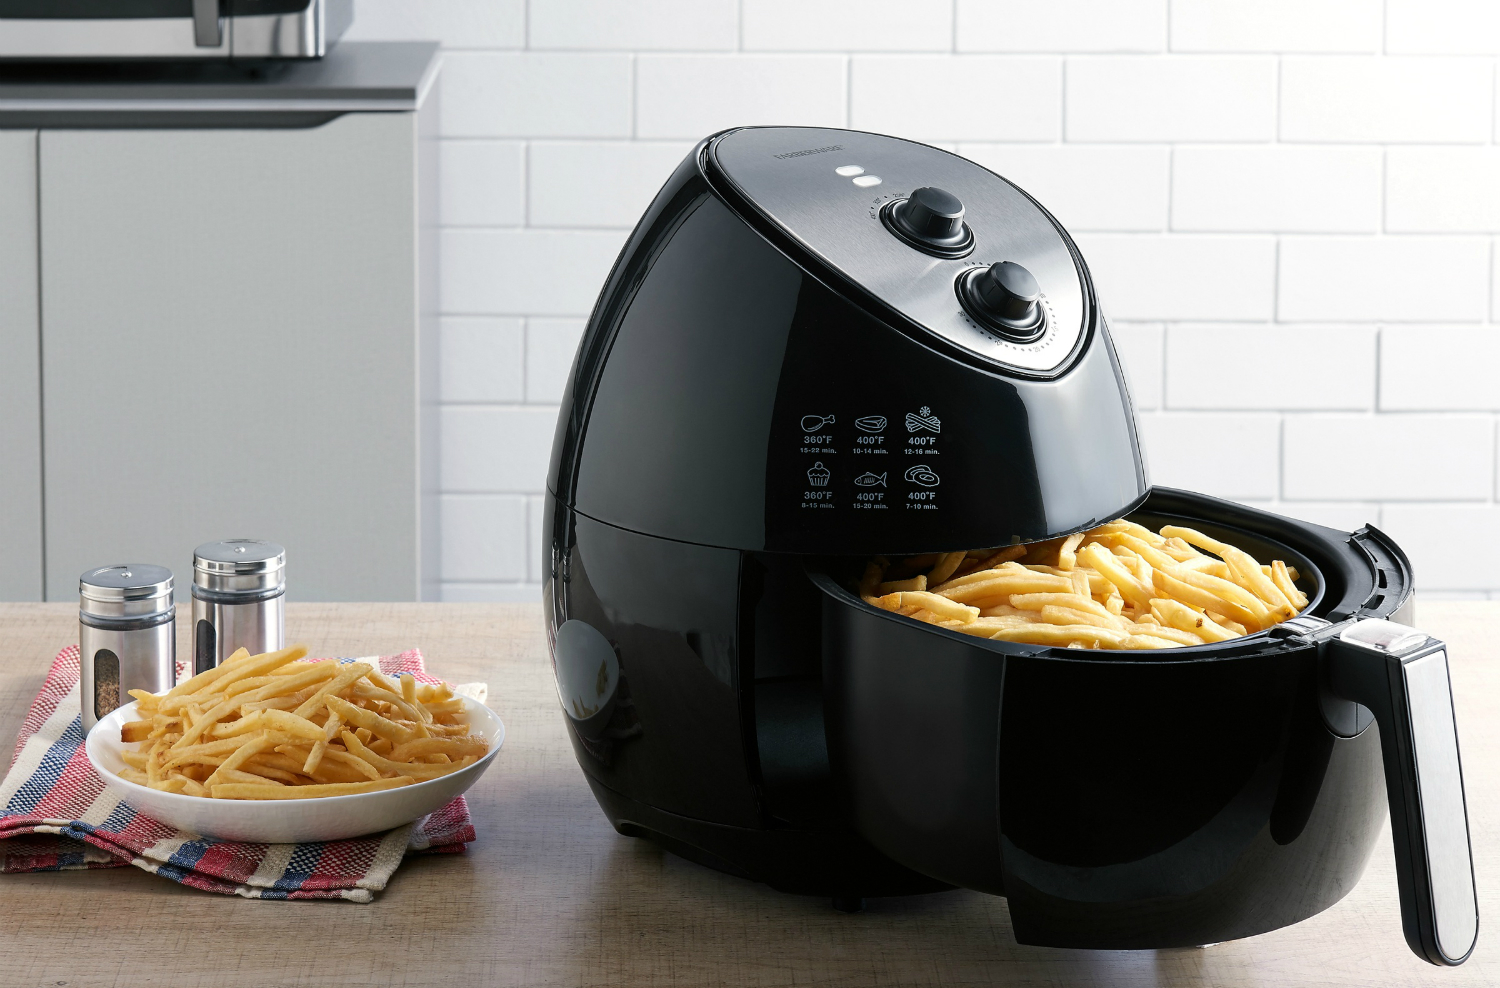 The 3.2-quart Farberware air fryer with fries in the open basket.